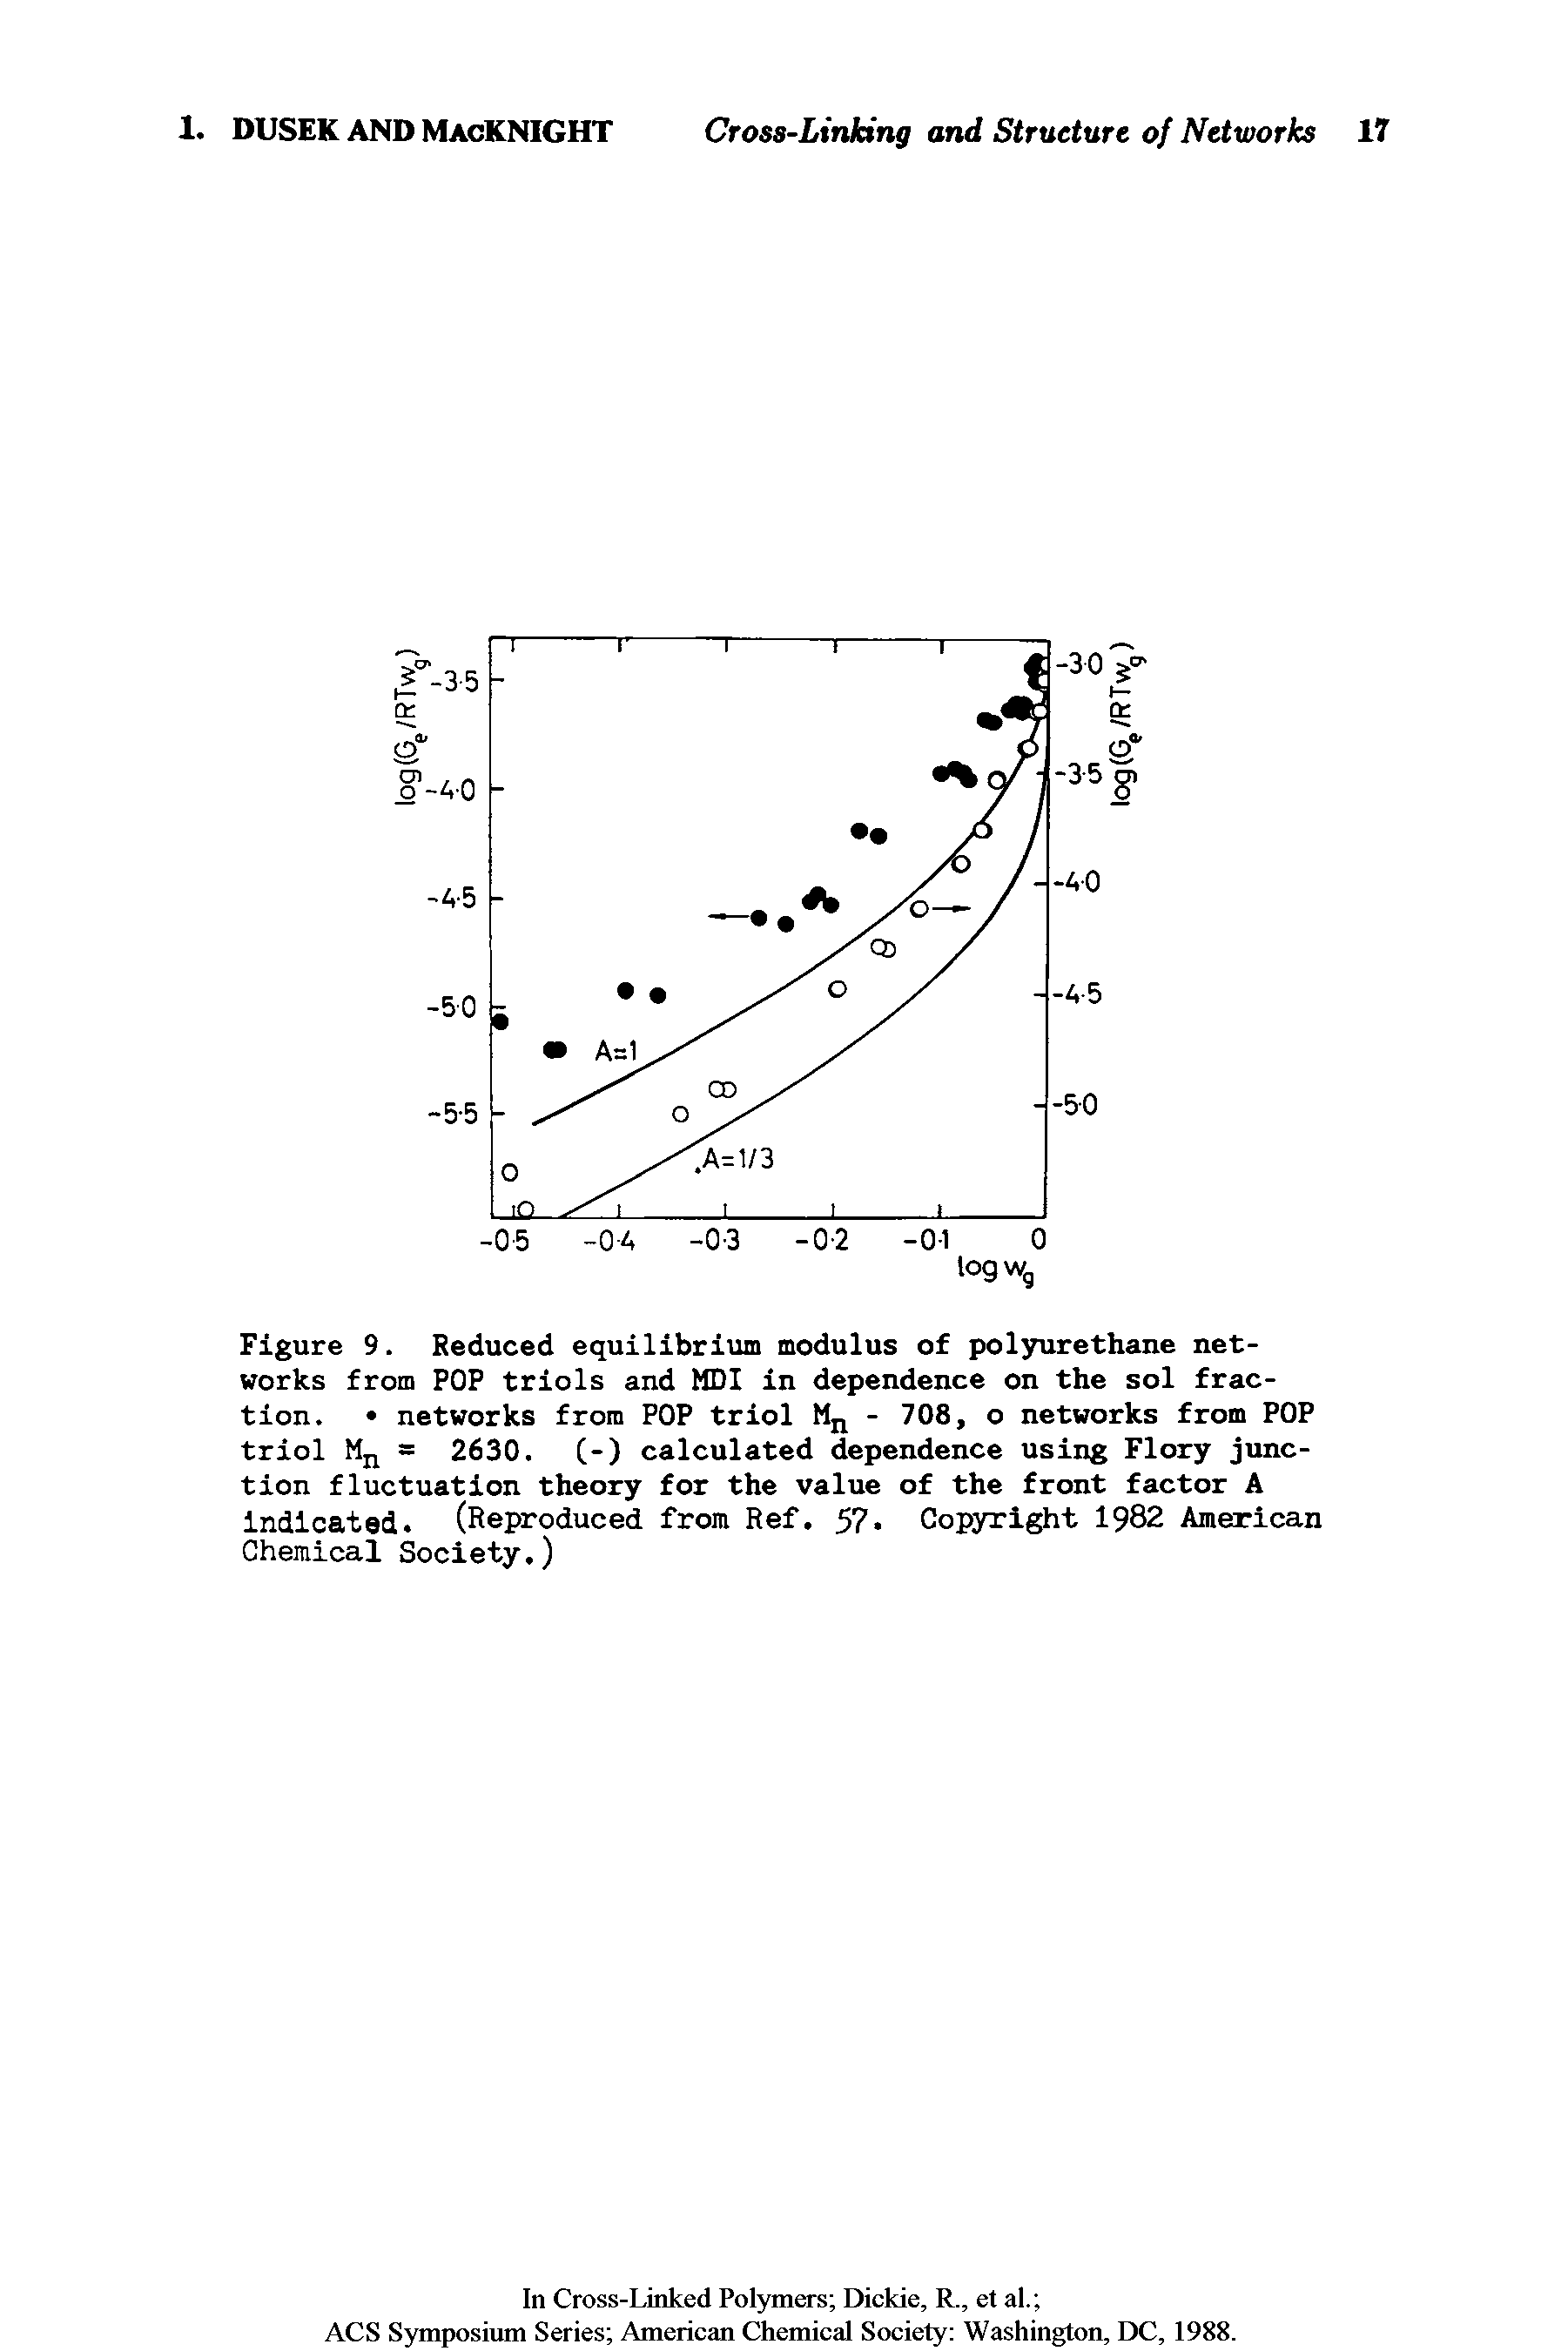 Figure 9. Reduced equilibrium modulus of polyurethane networks from POP trlols and MDI in dependence on the sol fraction. networks from POP triol Mjj - 708, o networks from POP triol Mjj = 2630. C-) calculated dependence using Flory junction fluctuation theory for the value of the front factor A indicated. (Reproduced from Ref. 57. Copyright 1982 American Chemical Society.)...